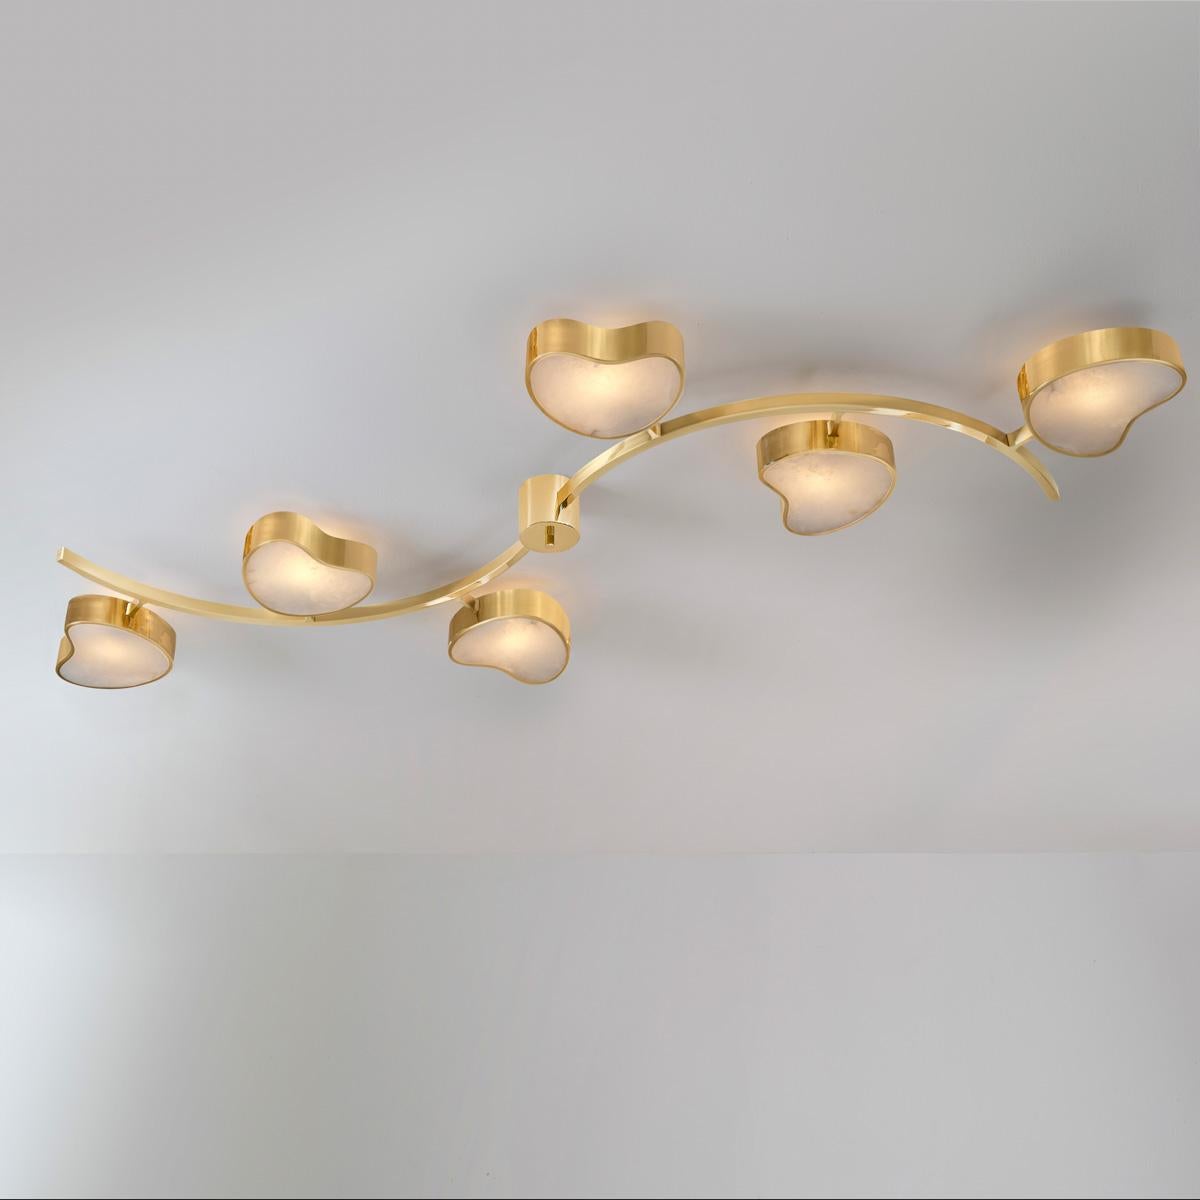 Cuore N.6 Ceiling Light by Gaspare Asaro. Satin Brass and Sand White Finish For Sale 2